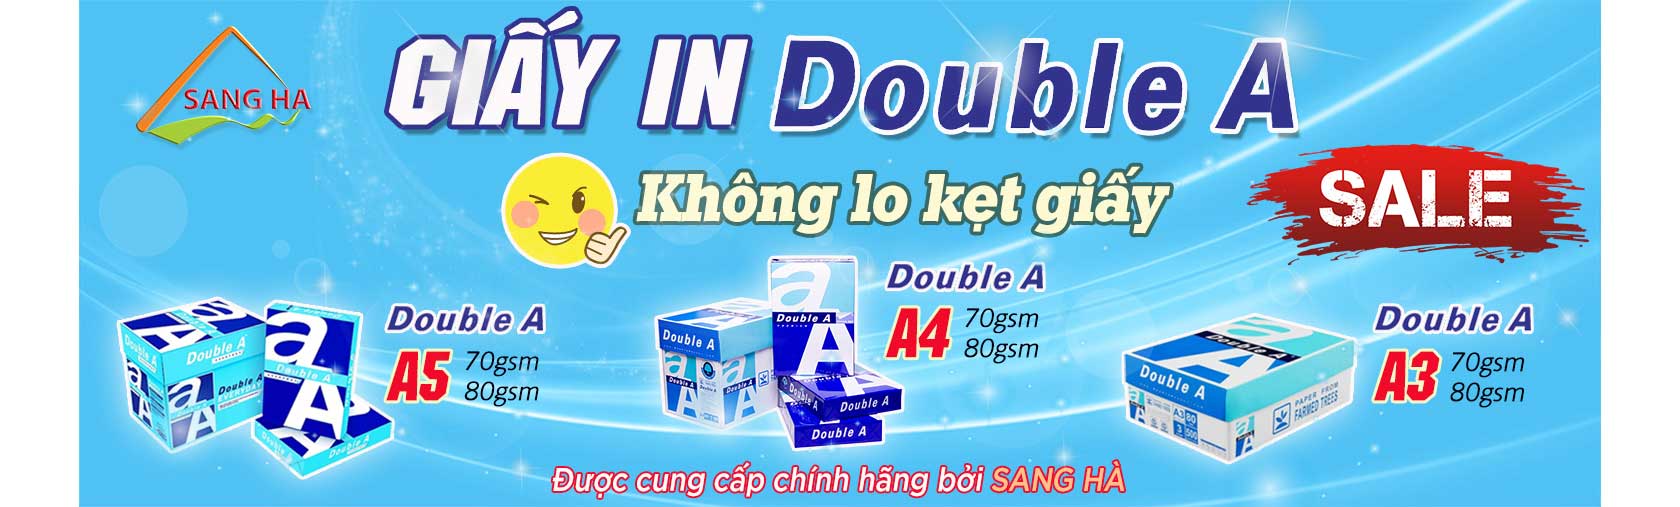 Giấy in double A